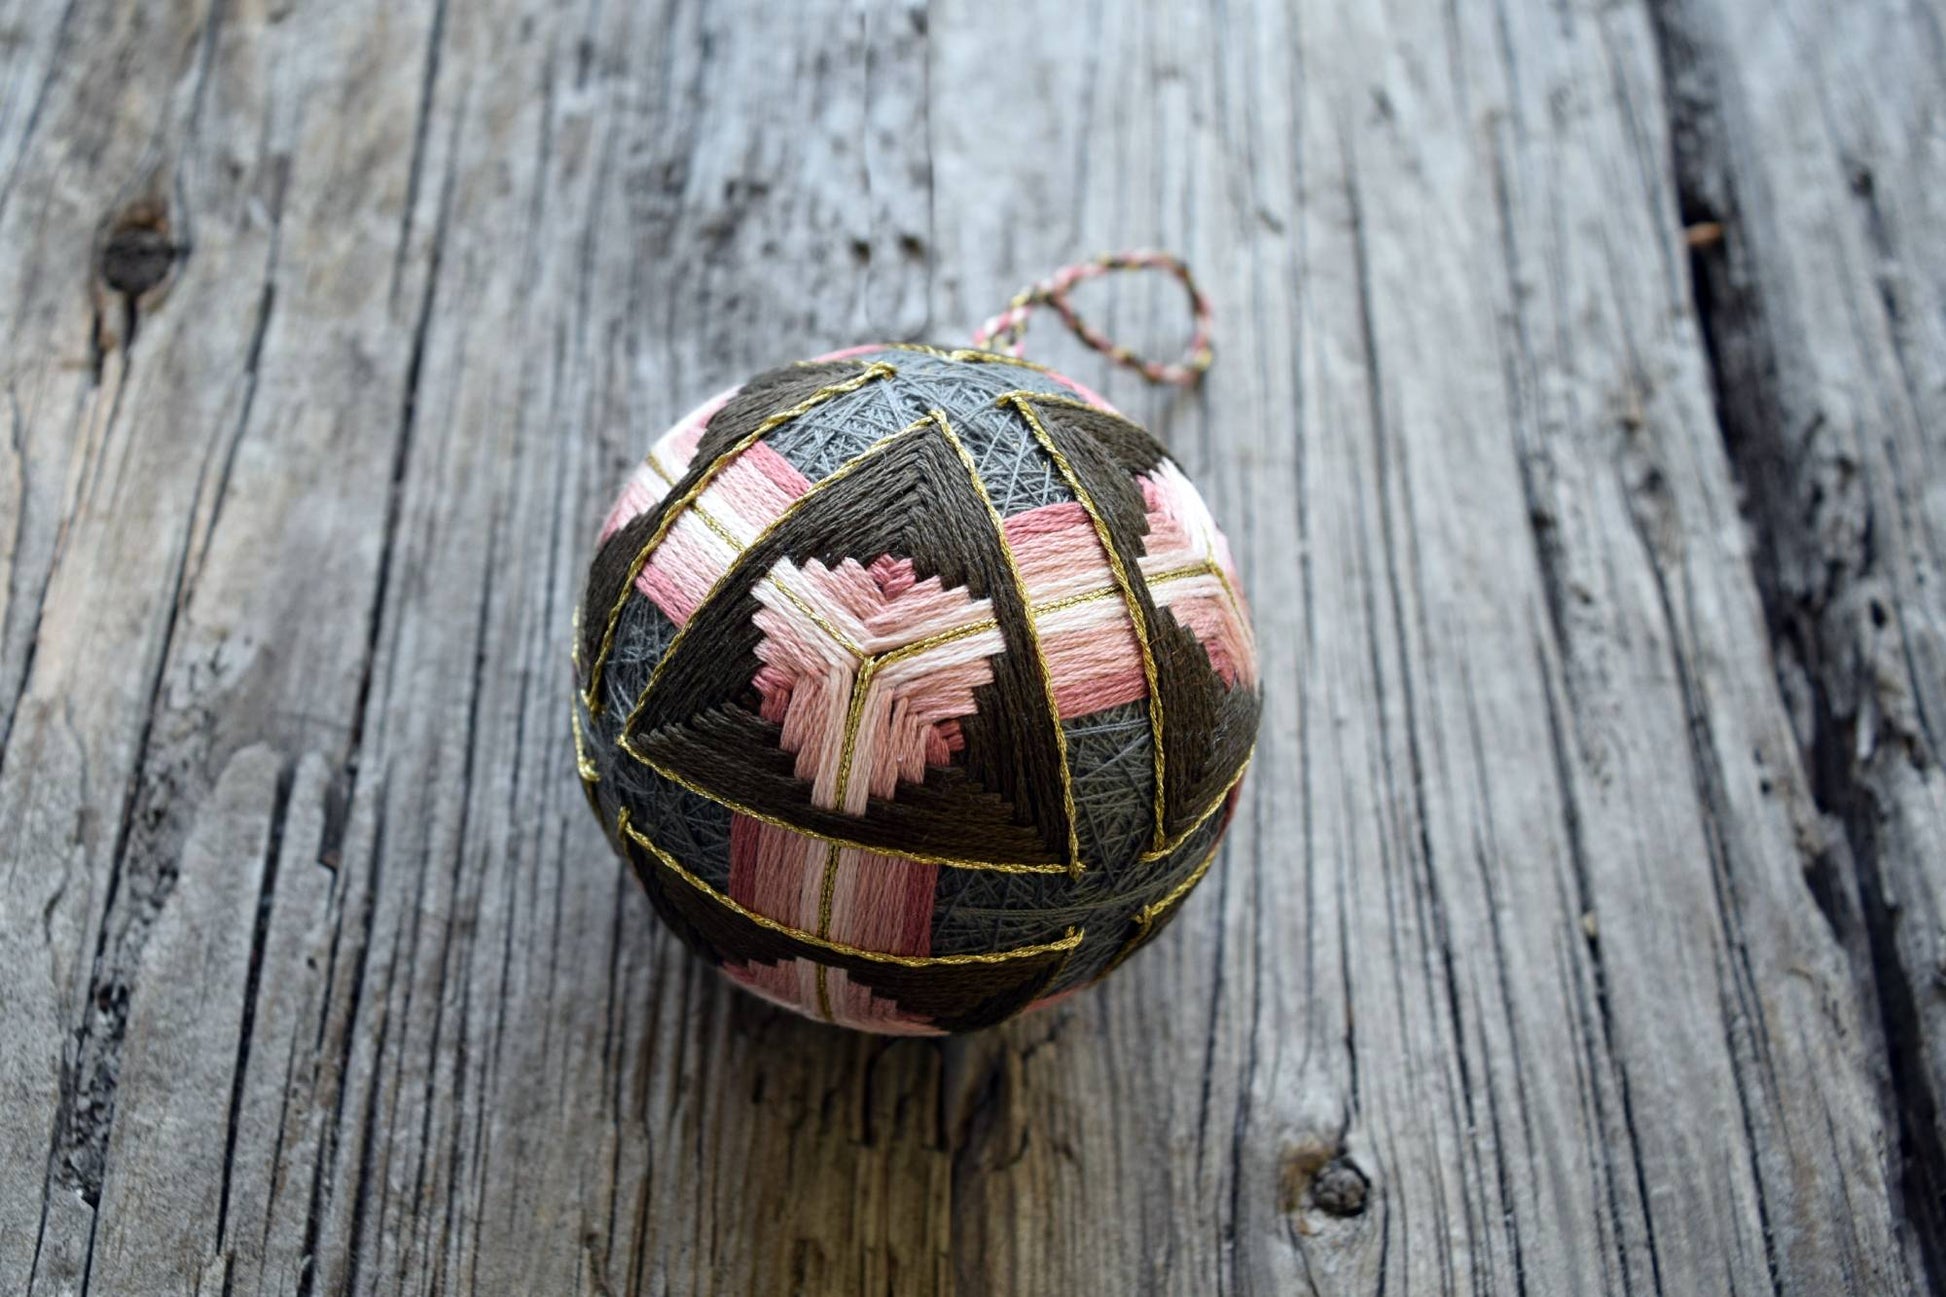 Brown and pink temari ball with golden accents